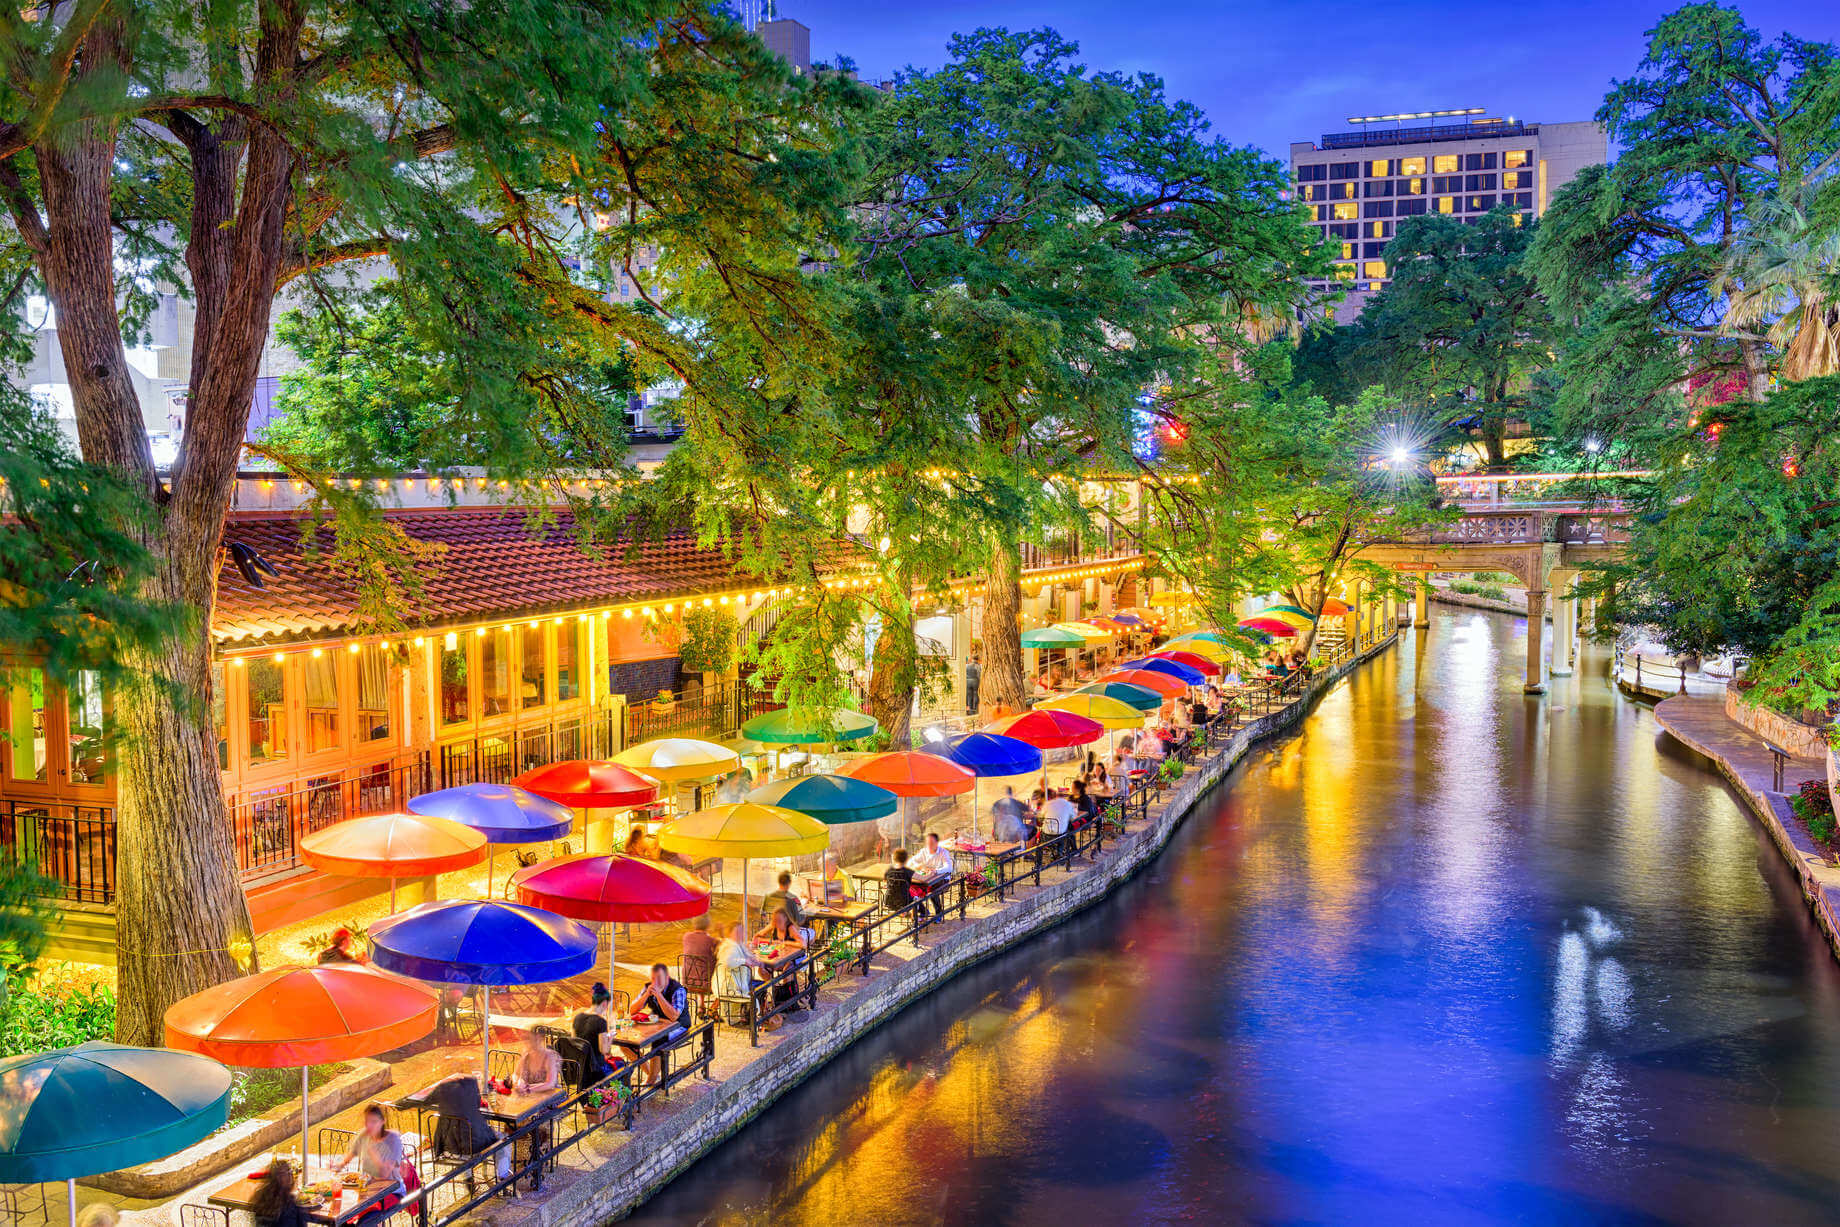 San Antonio Family Vacation Packages | Travel Packages to San Antonio Texas